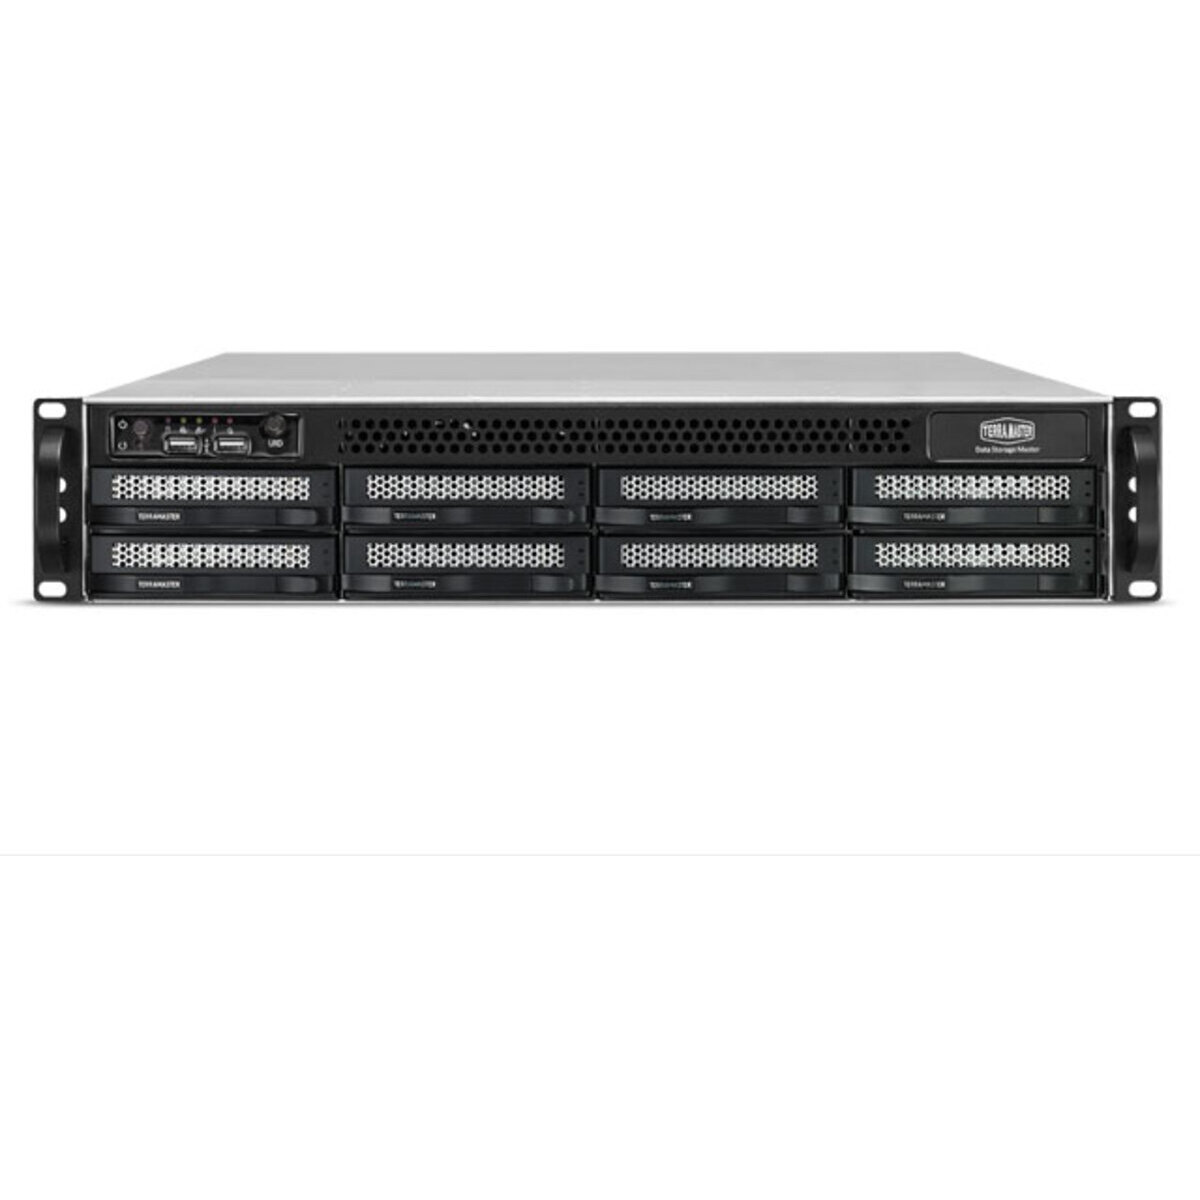 TerraMaster U8-722-2224 16tb 8-Bay RackMount Large Business / Enterprise NAS - Network Attached Storage Device 4x4tb Seagate IronWolf Pro ST4000NE001 3.5 7200rpm SATA 6Gb/s HDD NAS Class Drives Installed - Burn-In Tested U8-722-2224